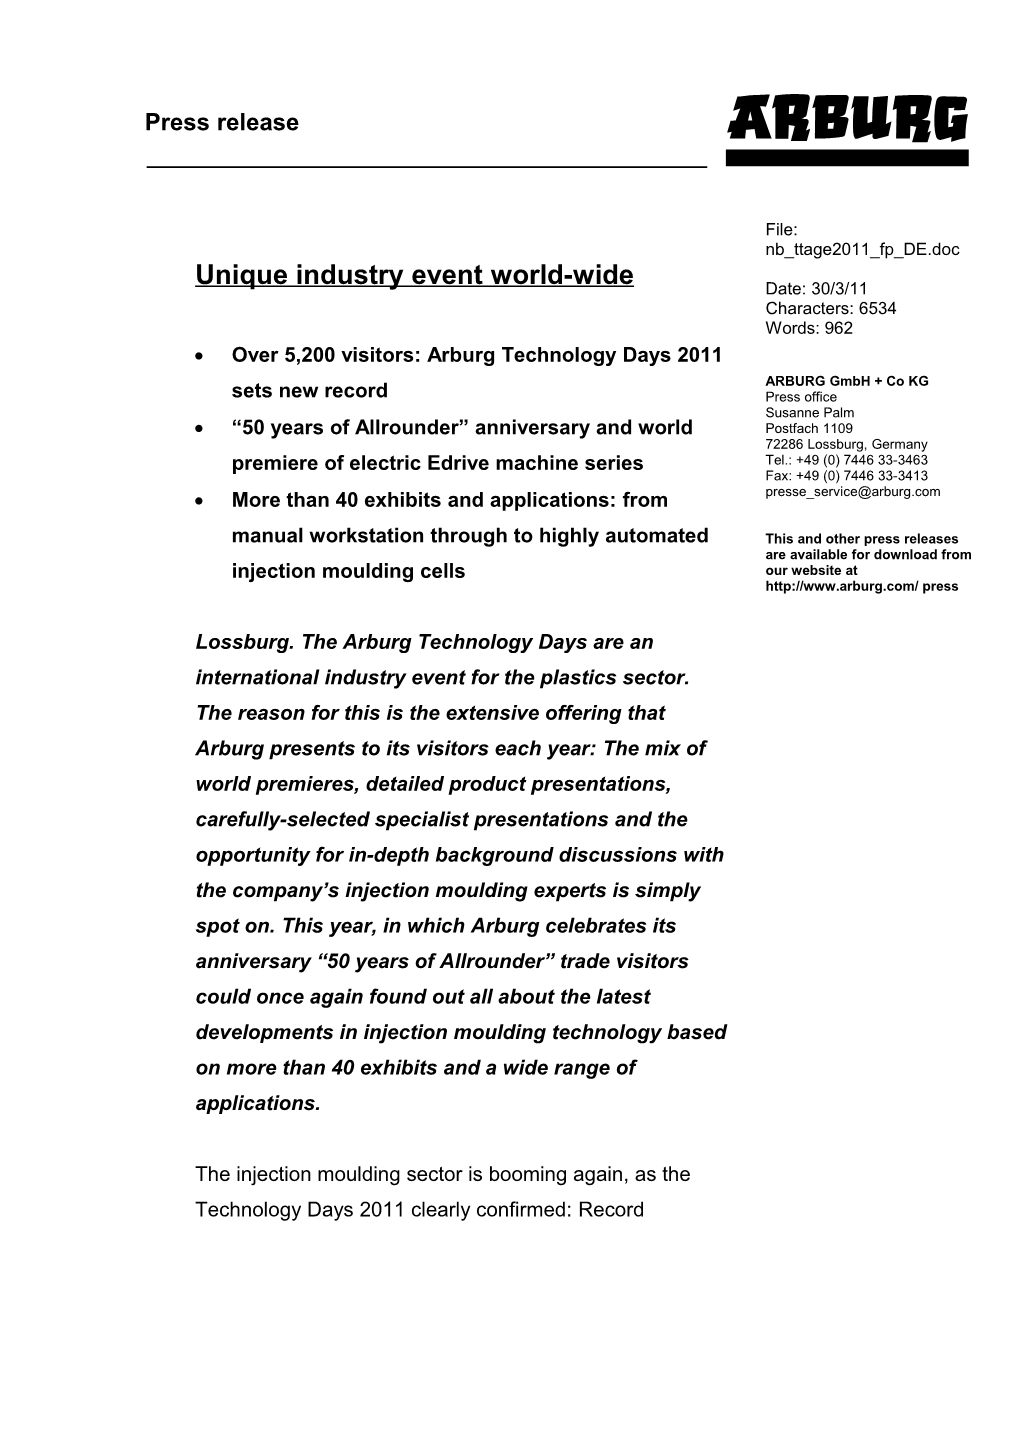 Unique Industry Event World-Wide